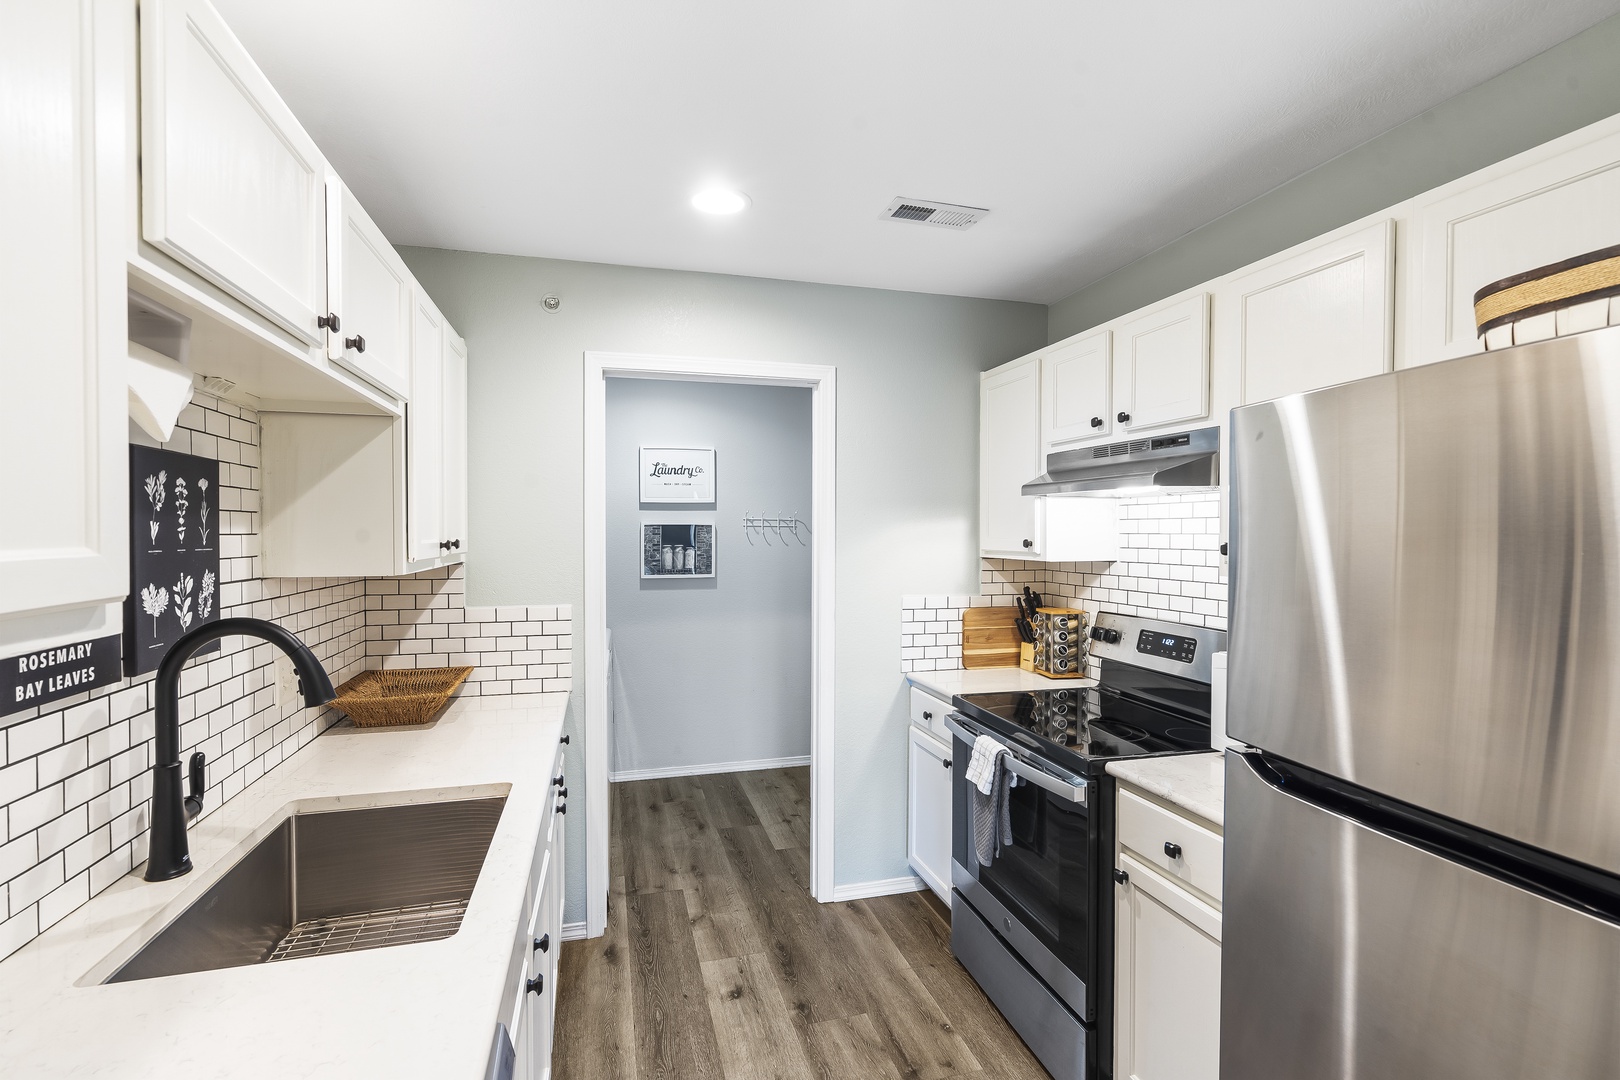 The chic, updated kitchen is spacious & offers all the comforts of home